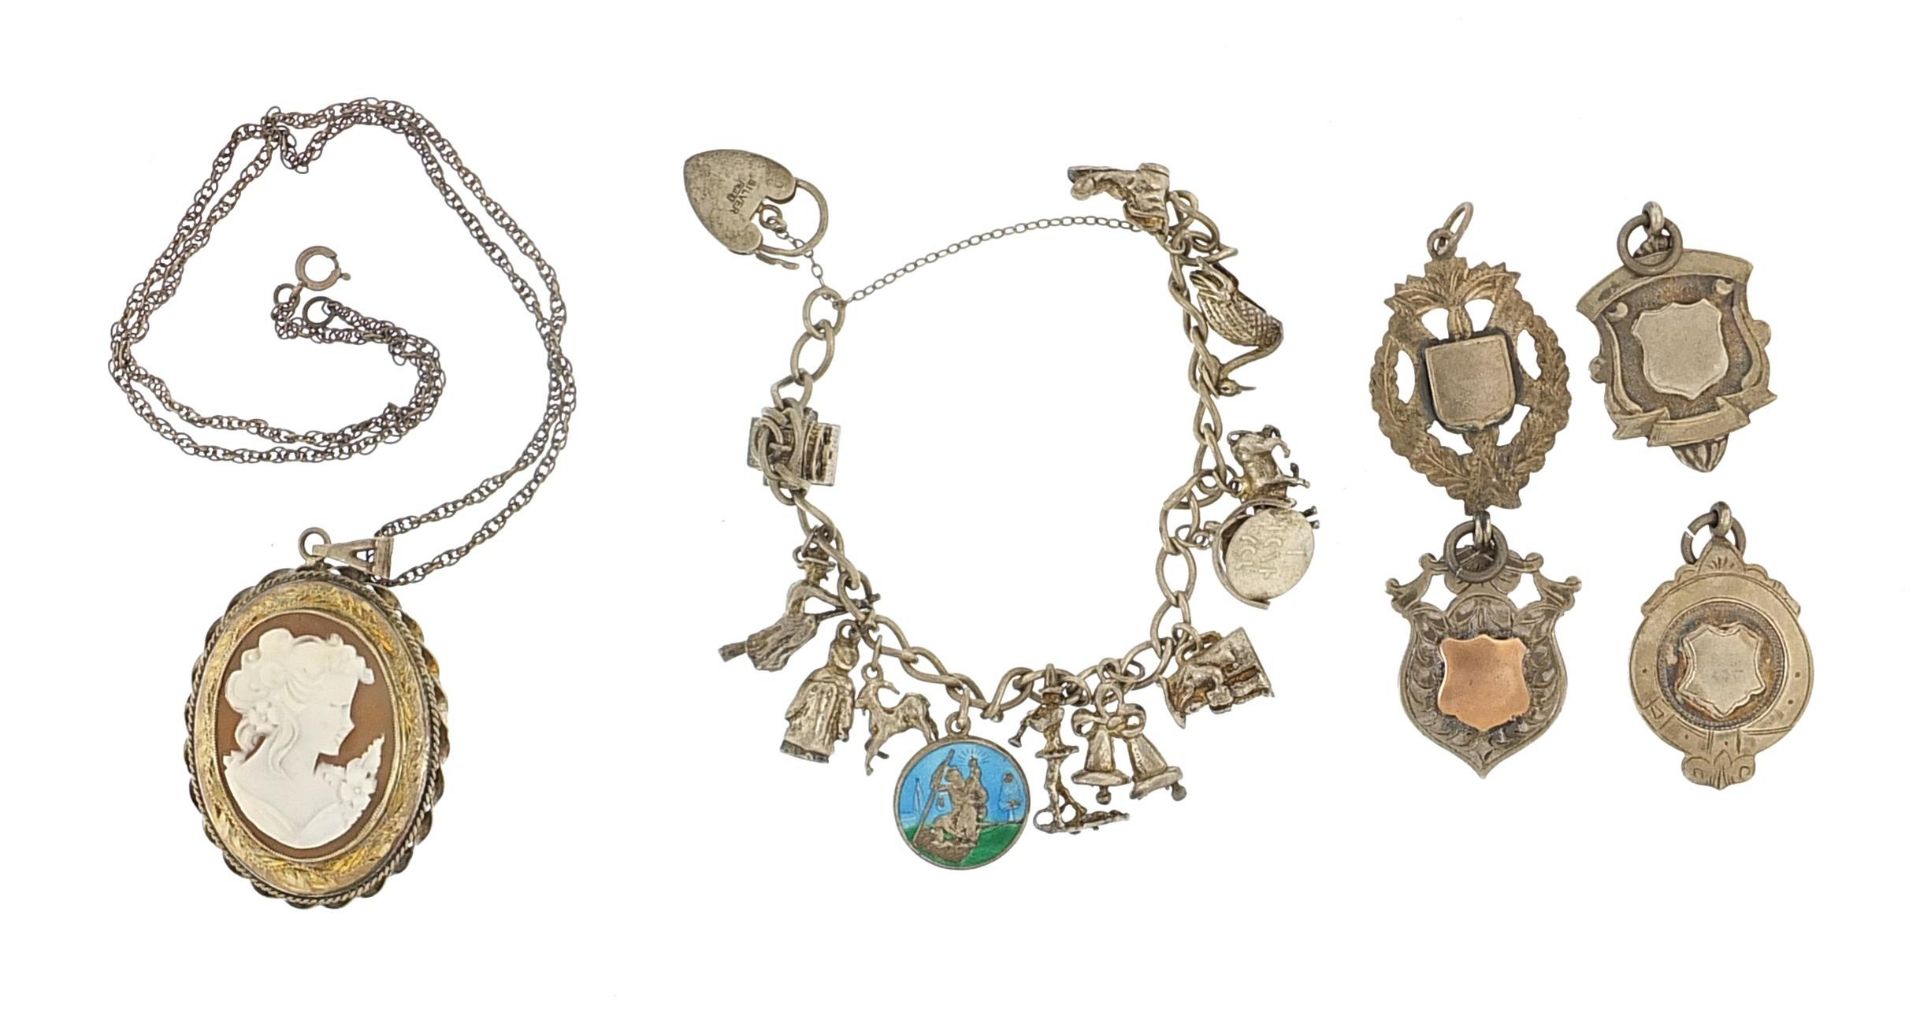 Silver jewellery comprising charm bracelet with charms, four sports jewels and large cameo locket on